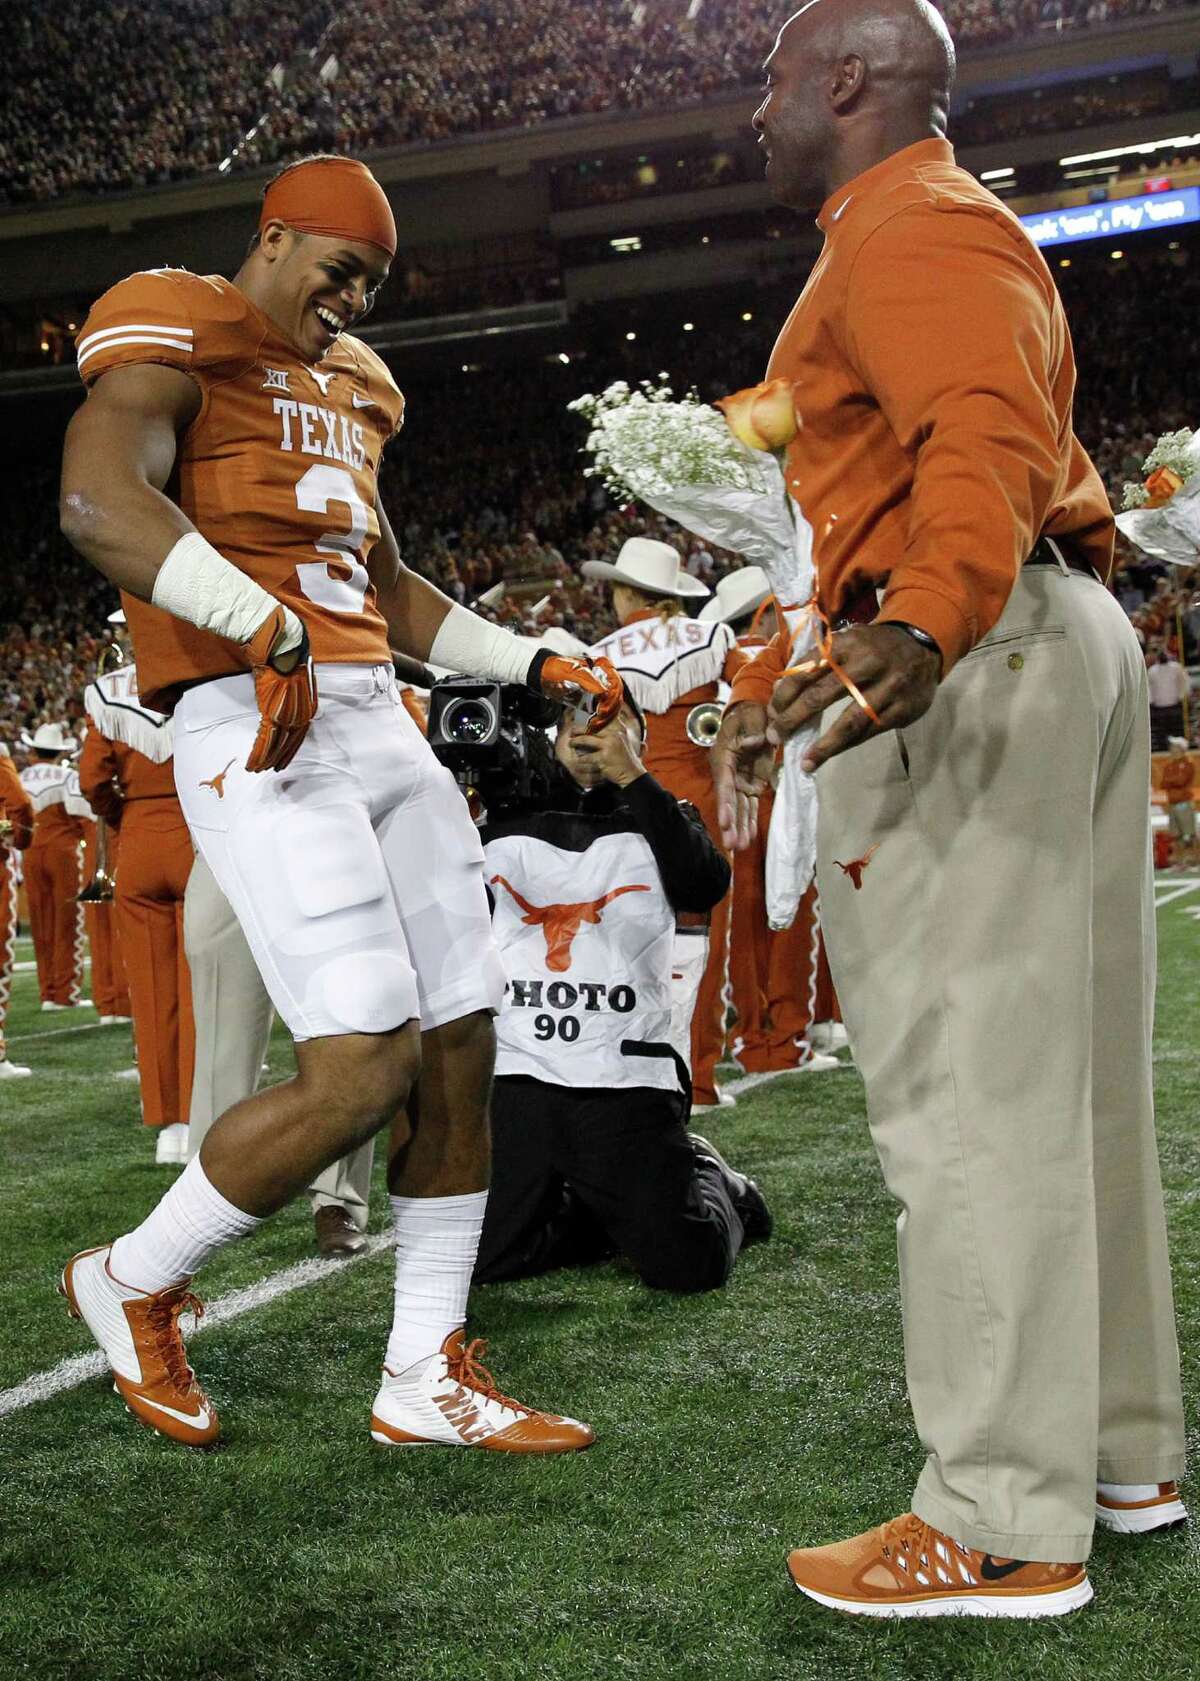 Jordan Hicks #3 of the Texas Longhorns is introduced and meets head coach Charlie Strong as the seniors were honored before playing the TCU Horned Frogs at the Darrell K Royal -Texas Memorial Stadium on November 27, 2014 in Austin. Texas. (Photo by Chris Covatta/Getty Images)